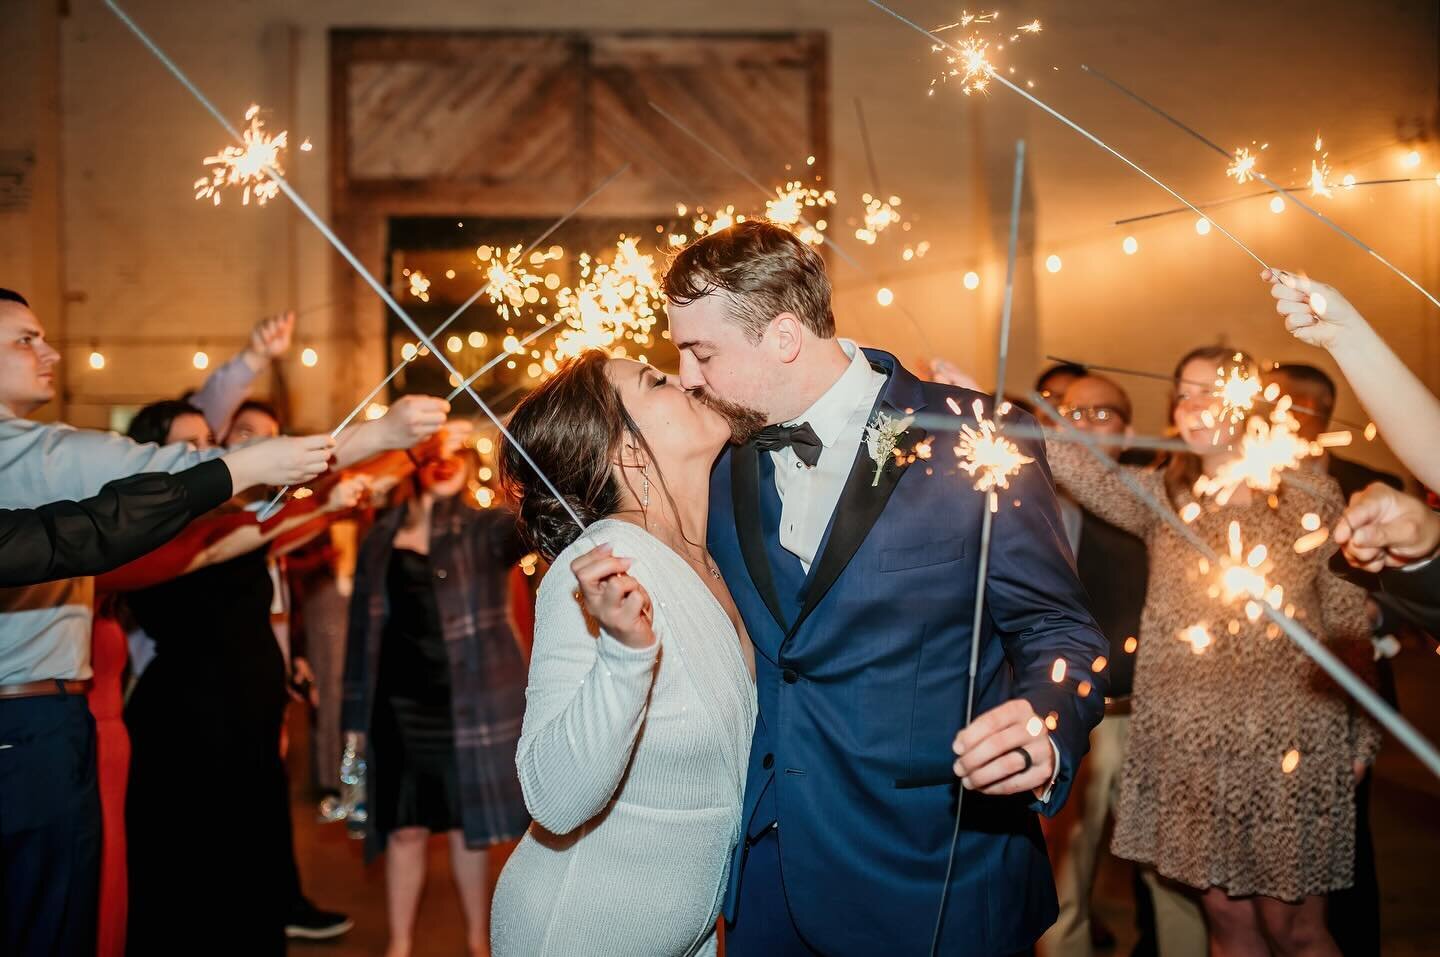 Ringing in the New Year the best way we know how&hellip; celebrating L O V E&hearts;️ 
&bull;
&bull;
Happy Anniversary to our Ryan + Julia! Cheers to O N E year and a lifetime of many more! 

Venues: @themaolaatriverside
Planner: @downtoido 
Rentals: